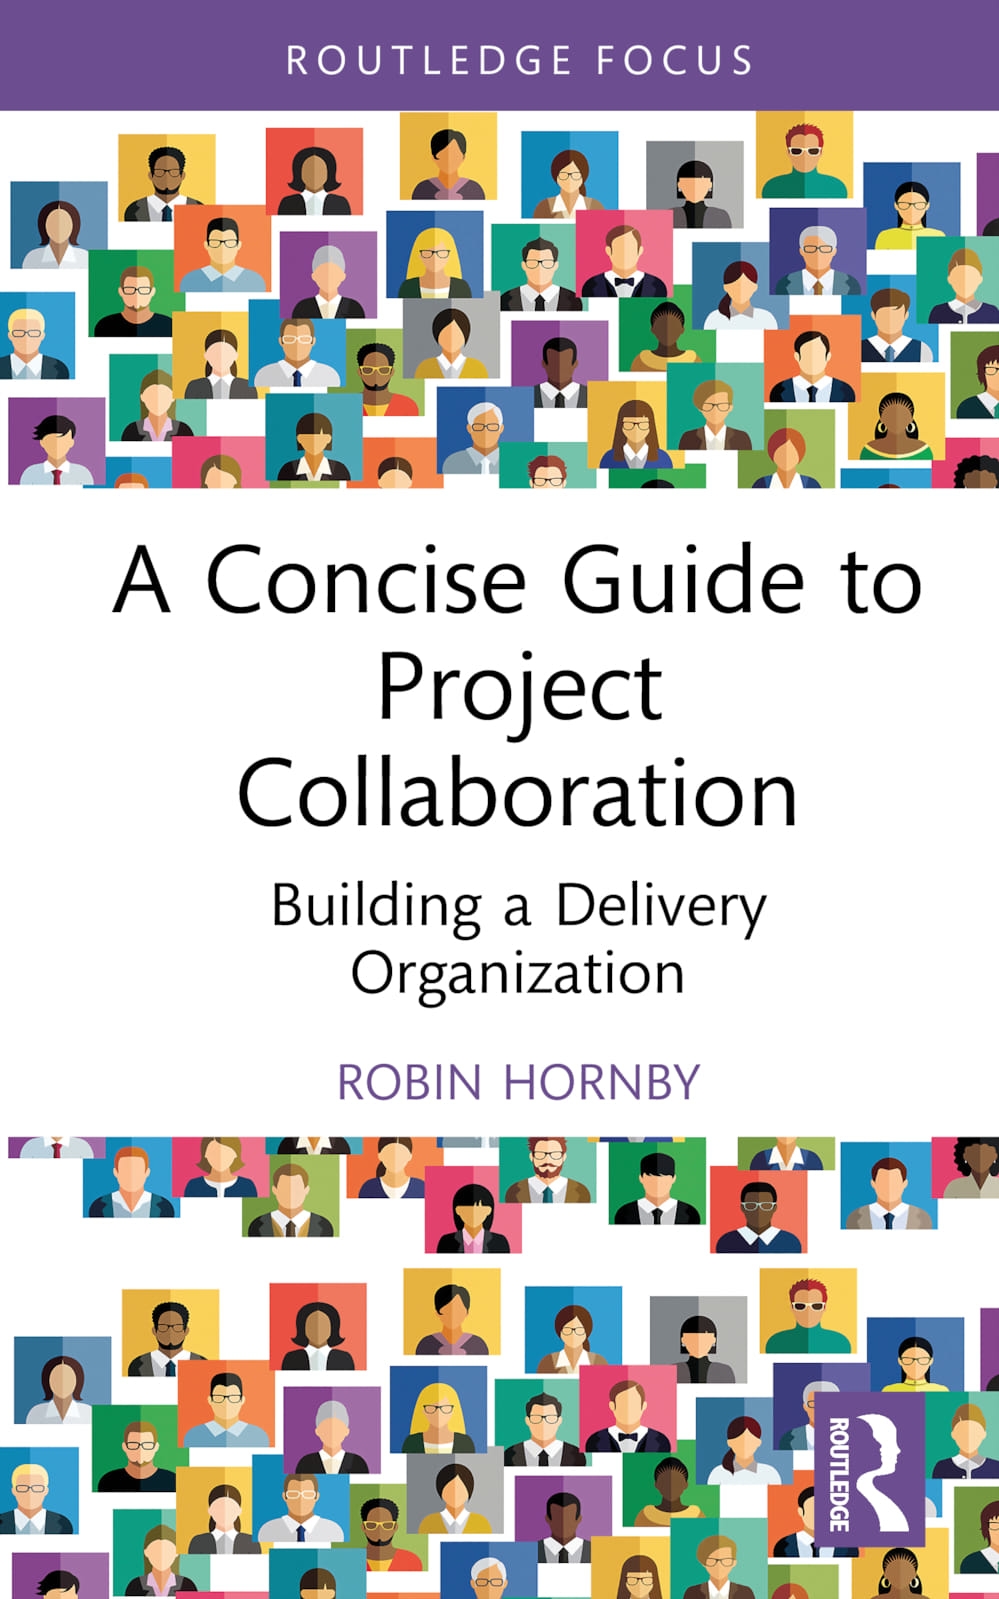 A Concise Guide to Project Collaboration: Building a Delivery Organization